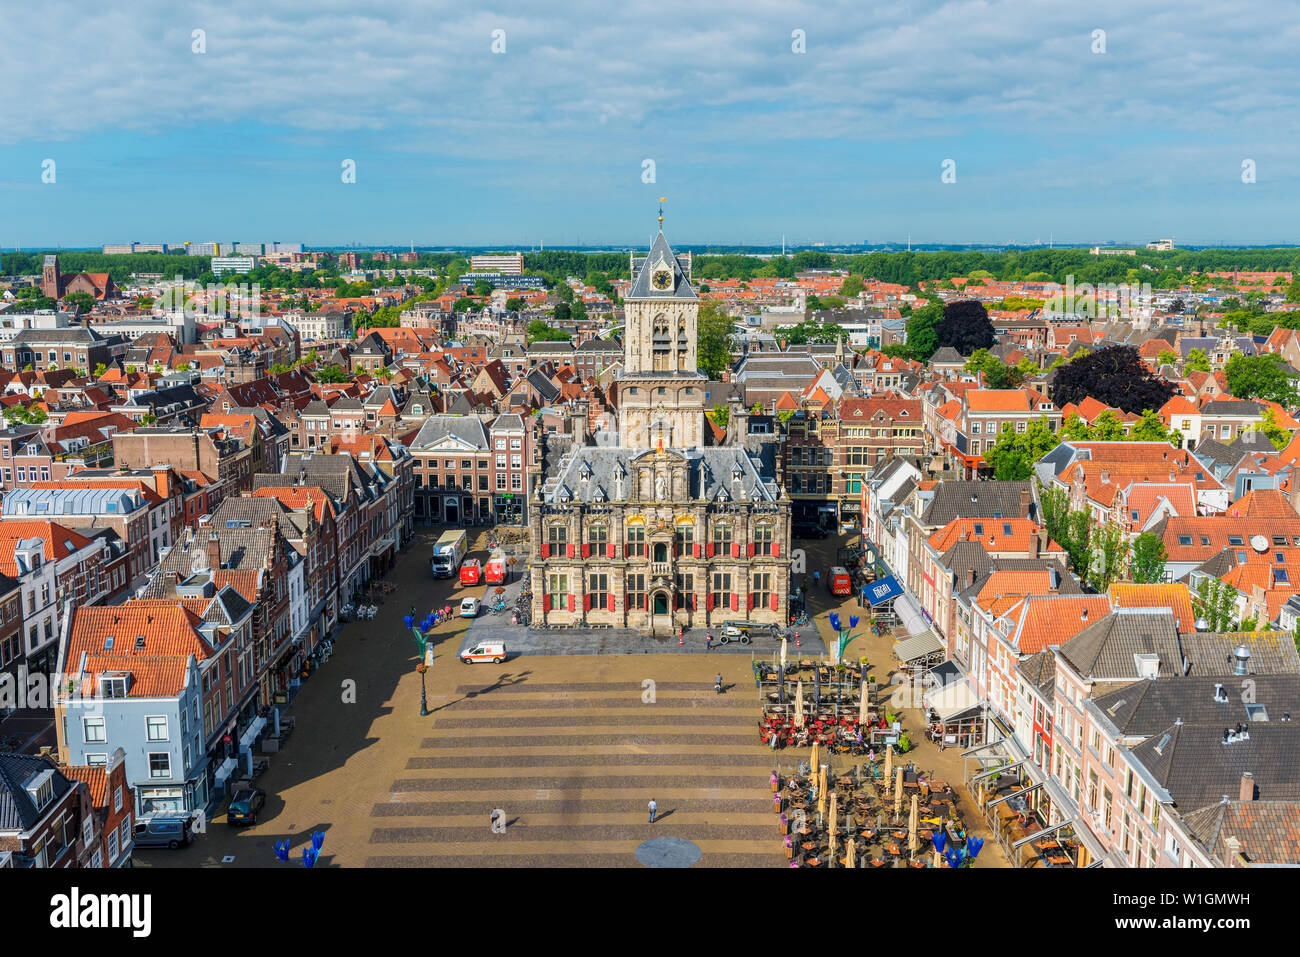 High angle view on Market Square and City Hall in Delft, Netherlands. Delft is an old Dutch city, known for its pottery ('Delfts Blauw') and canals. Stock Photo